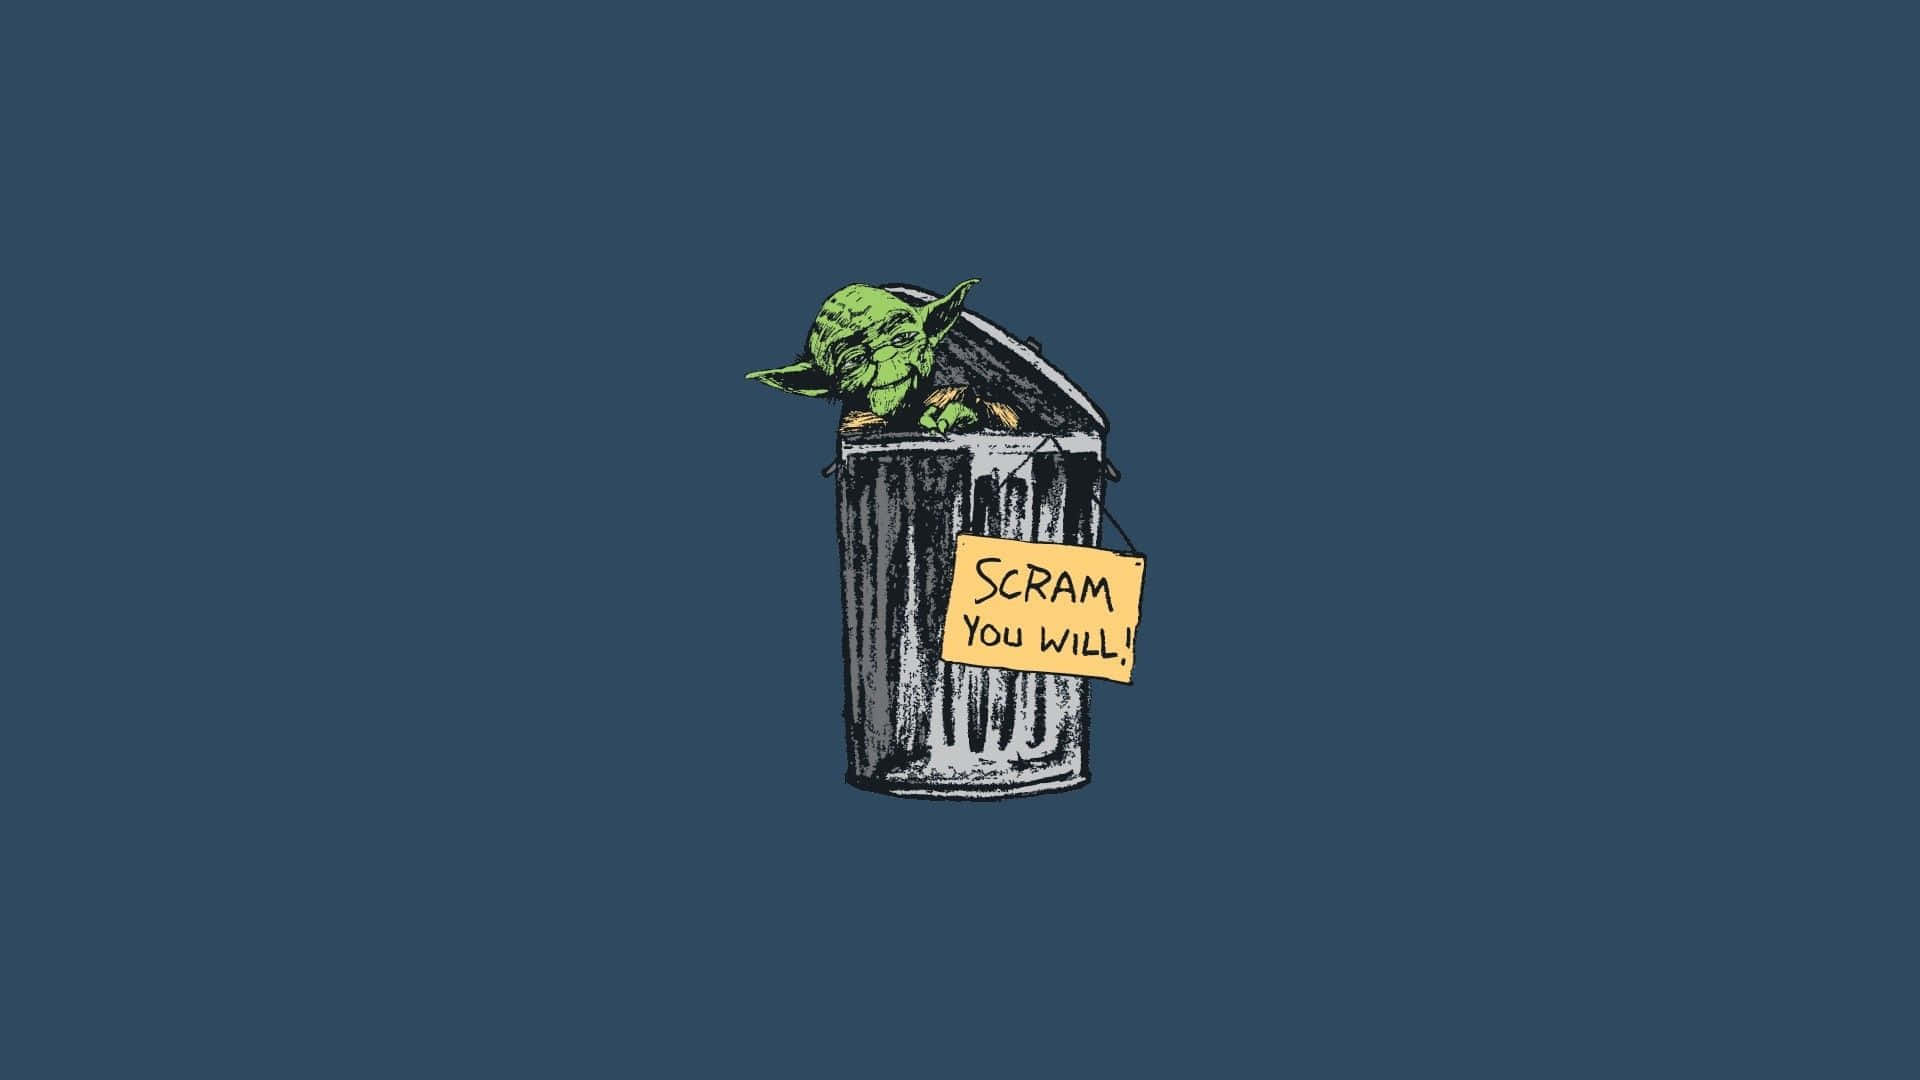 Yoda delivers a humorous one-liner Wallpaper